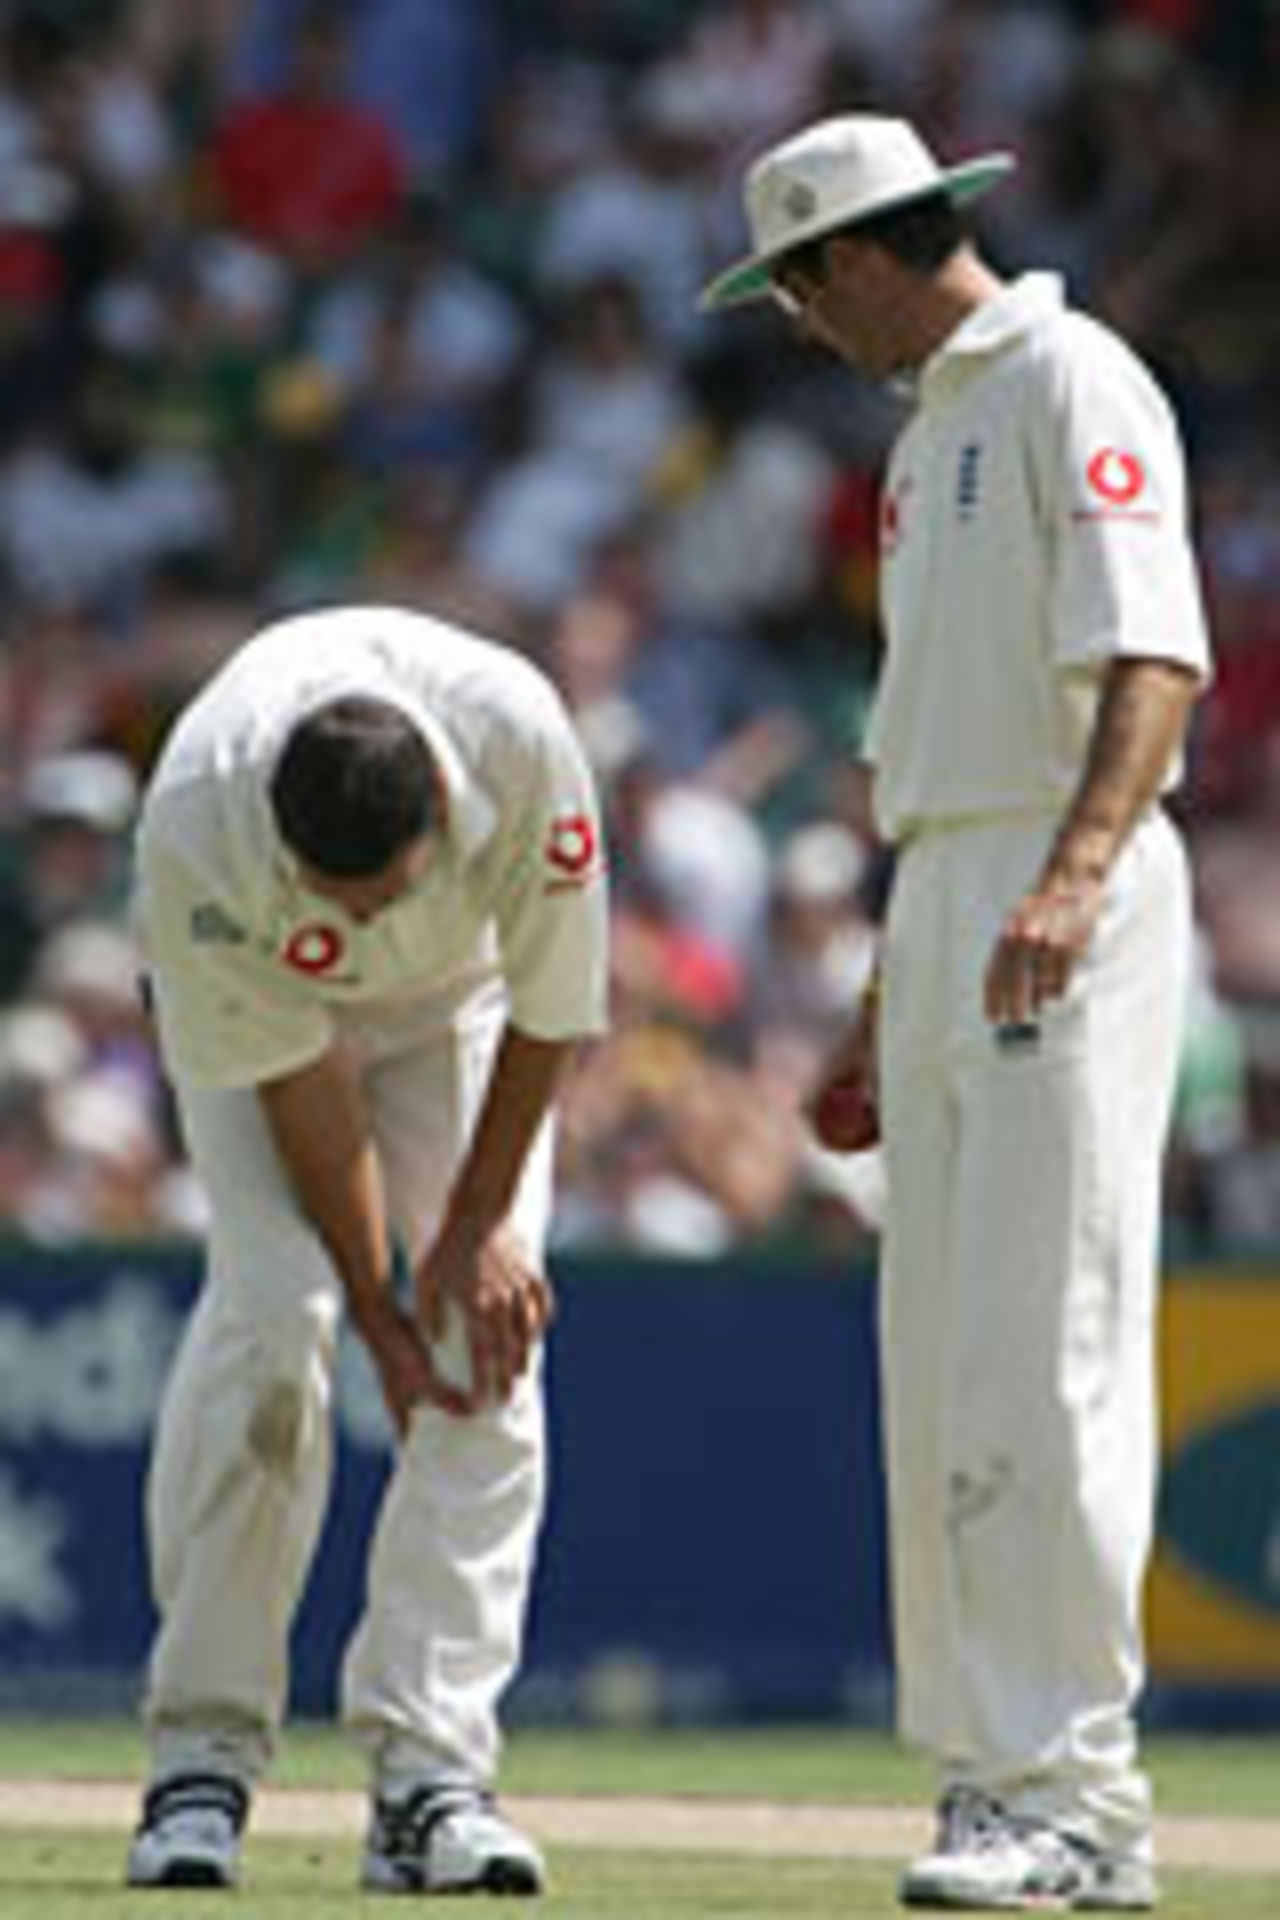 Stepehen Harmison clutches his knee, South Africa v England, 4th Test, Jo'burg, 3rd day, January 15, 2005